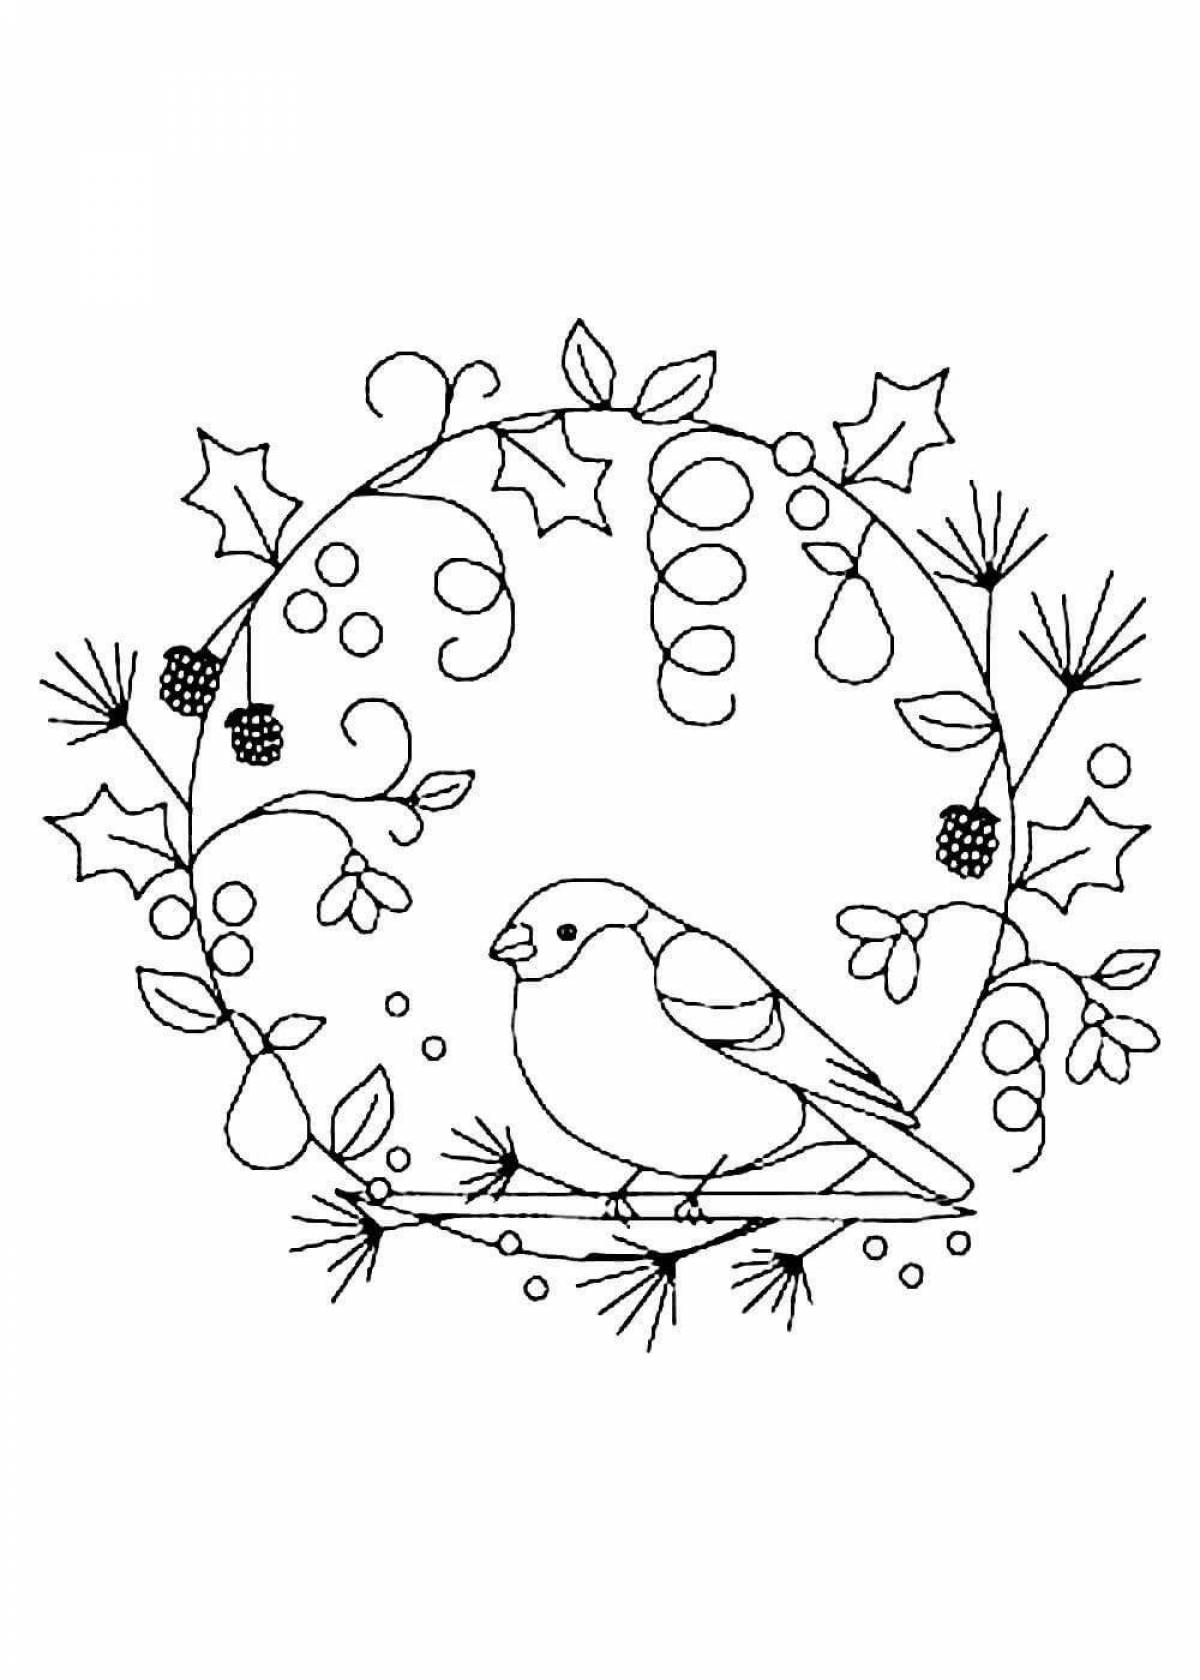 Coloring live bullfinch for kids